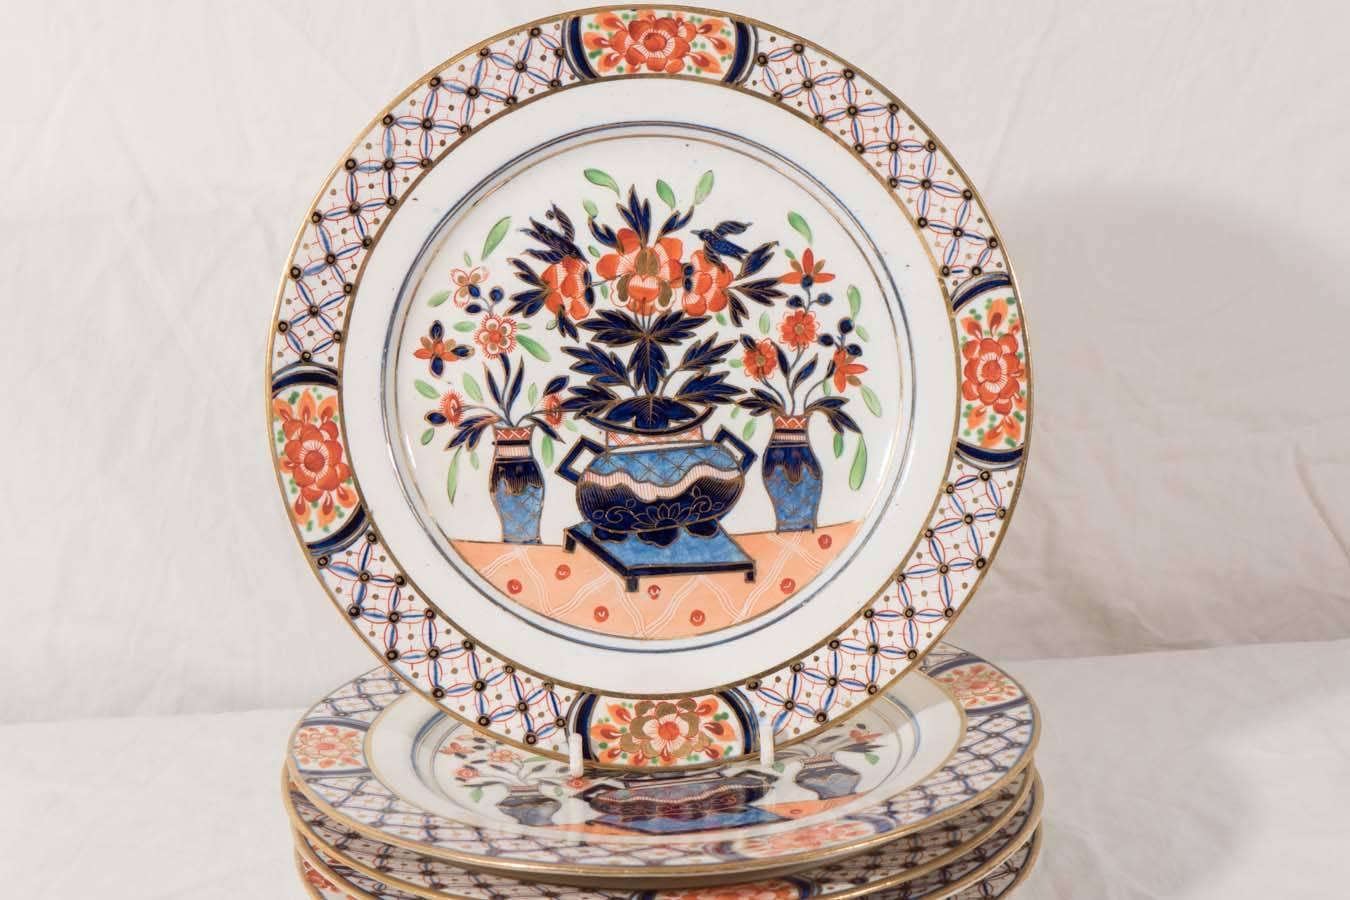 A set of 14 English dishes with a traditional Imari design showing three flower filled vases on a garden terrace. The addition of green in the leaves energizes the scene. The border is patterned with diamonds and four panels with flowers.
 